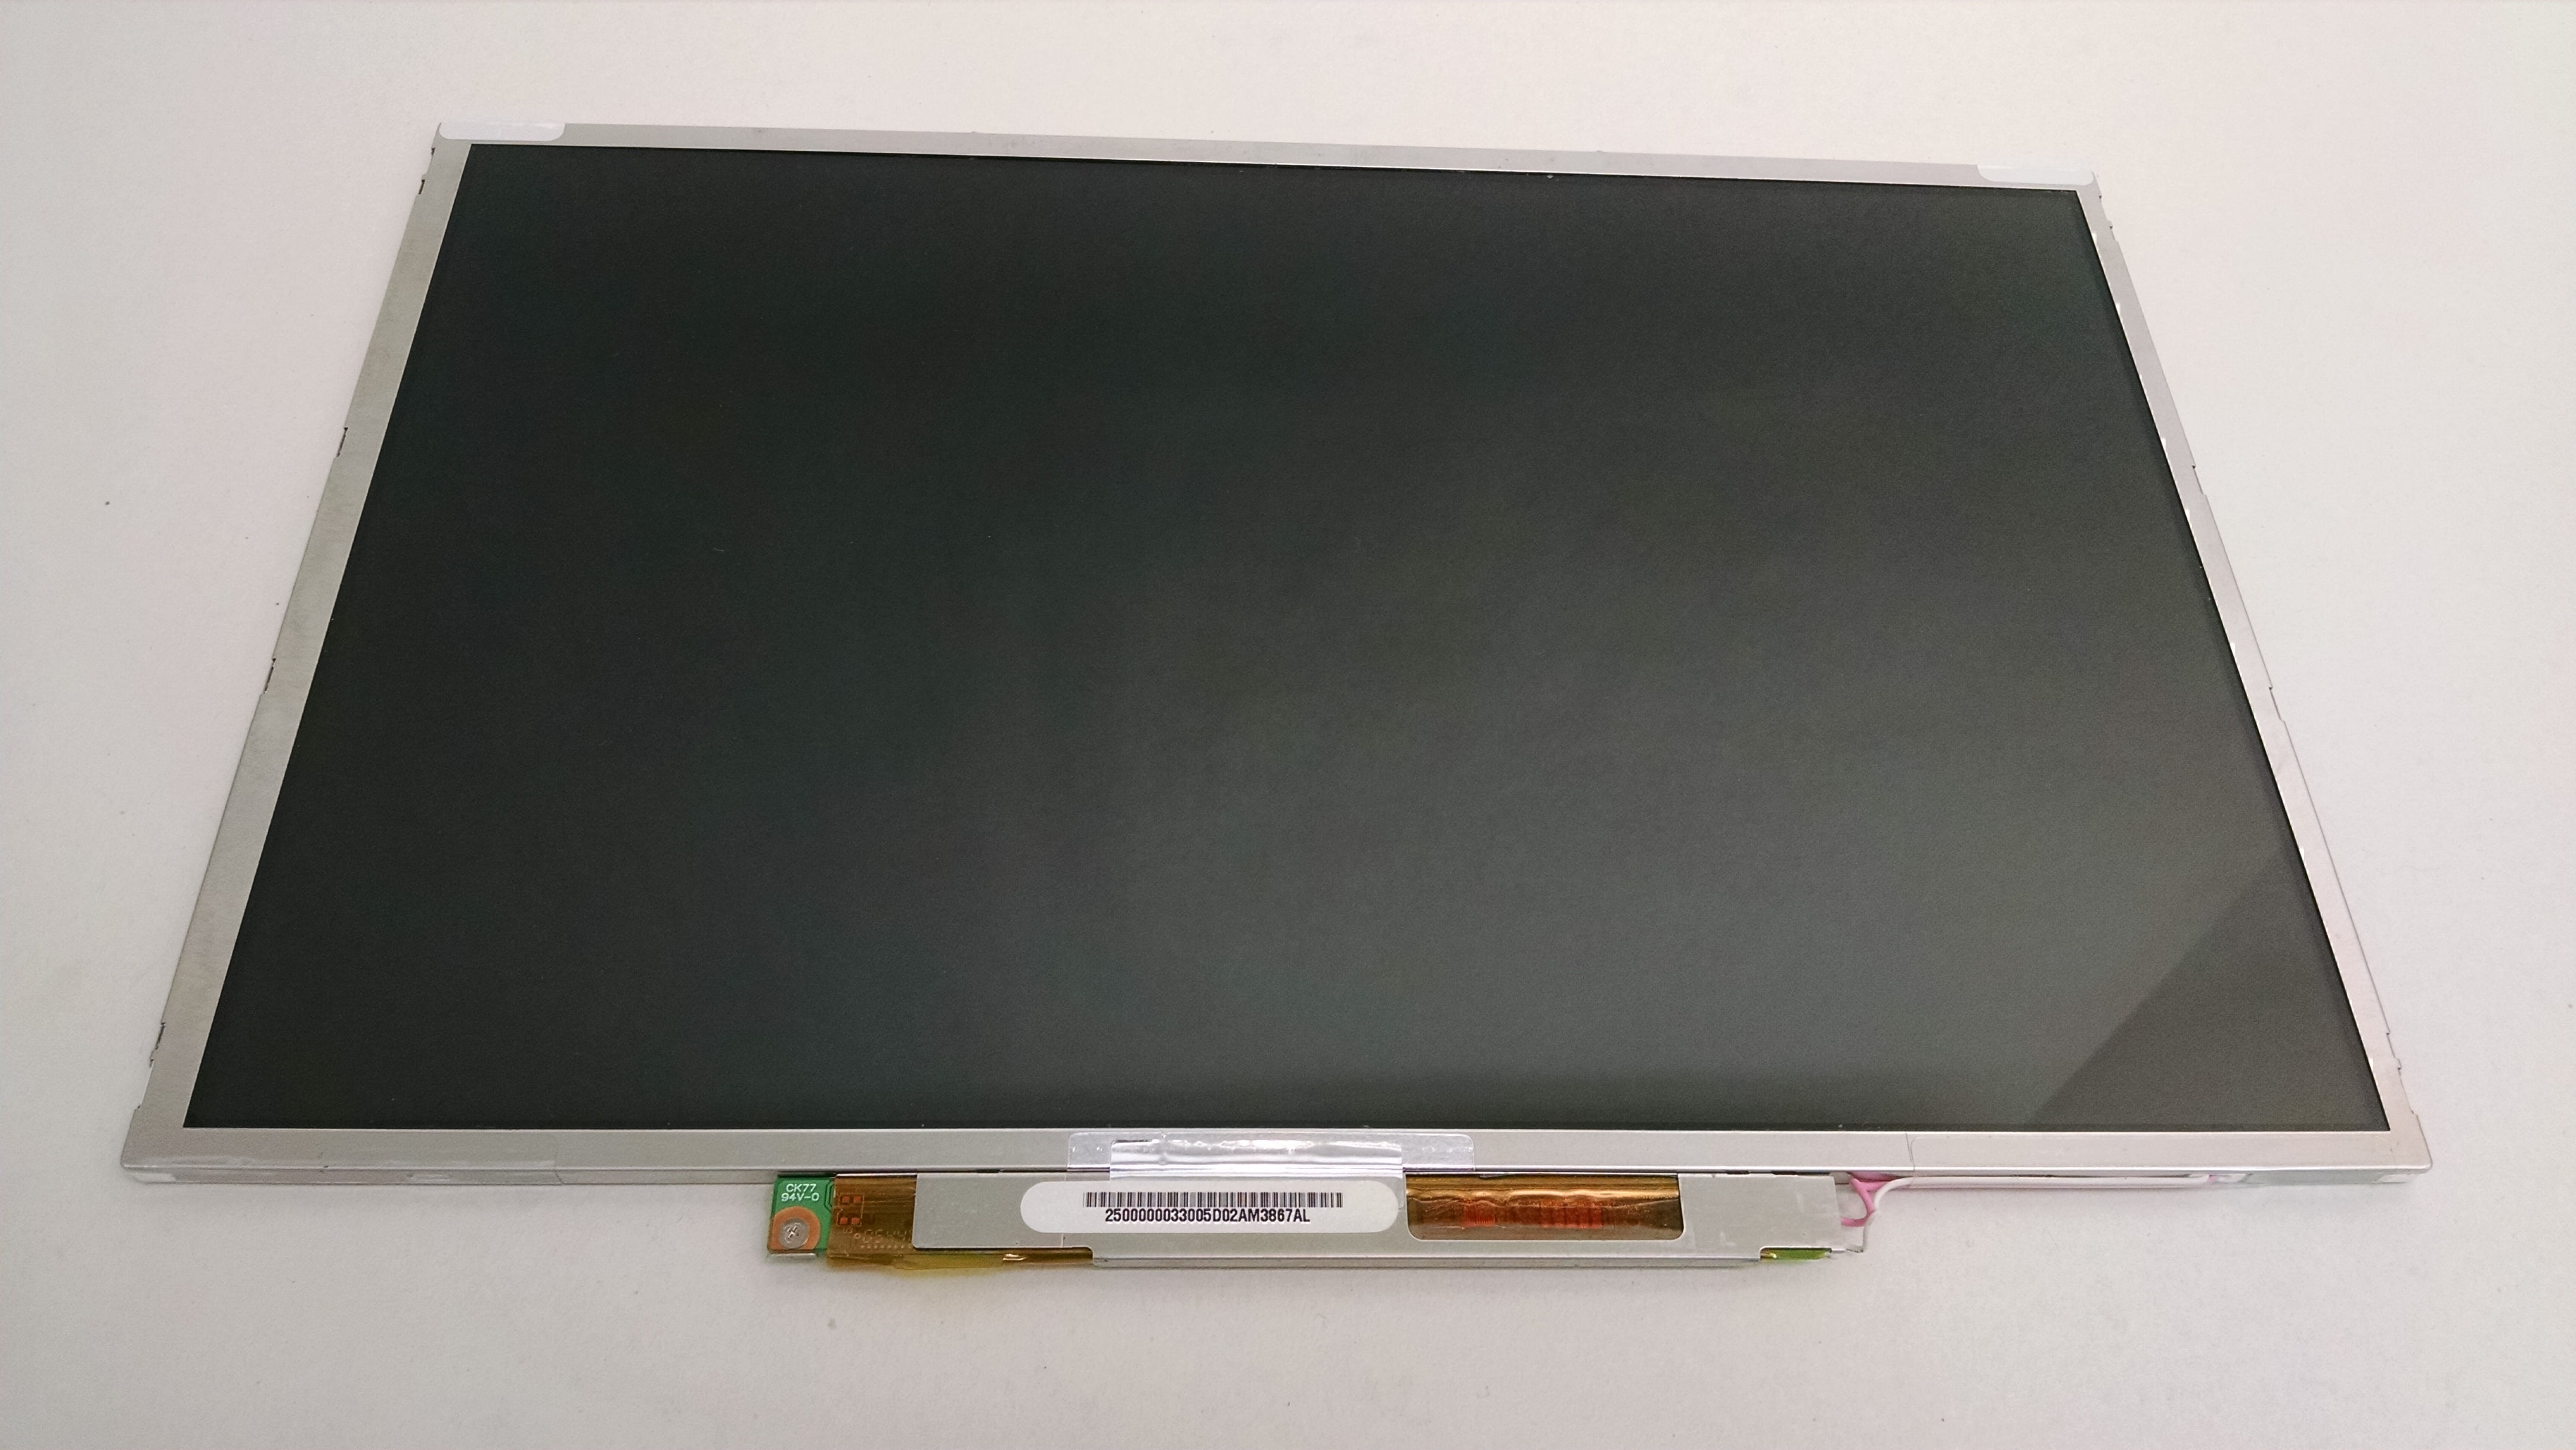 15 inch Display LCD Cable 29-UD4054-51 for Gericom Hummer 2430e 2440e 26640 2840e Series